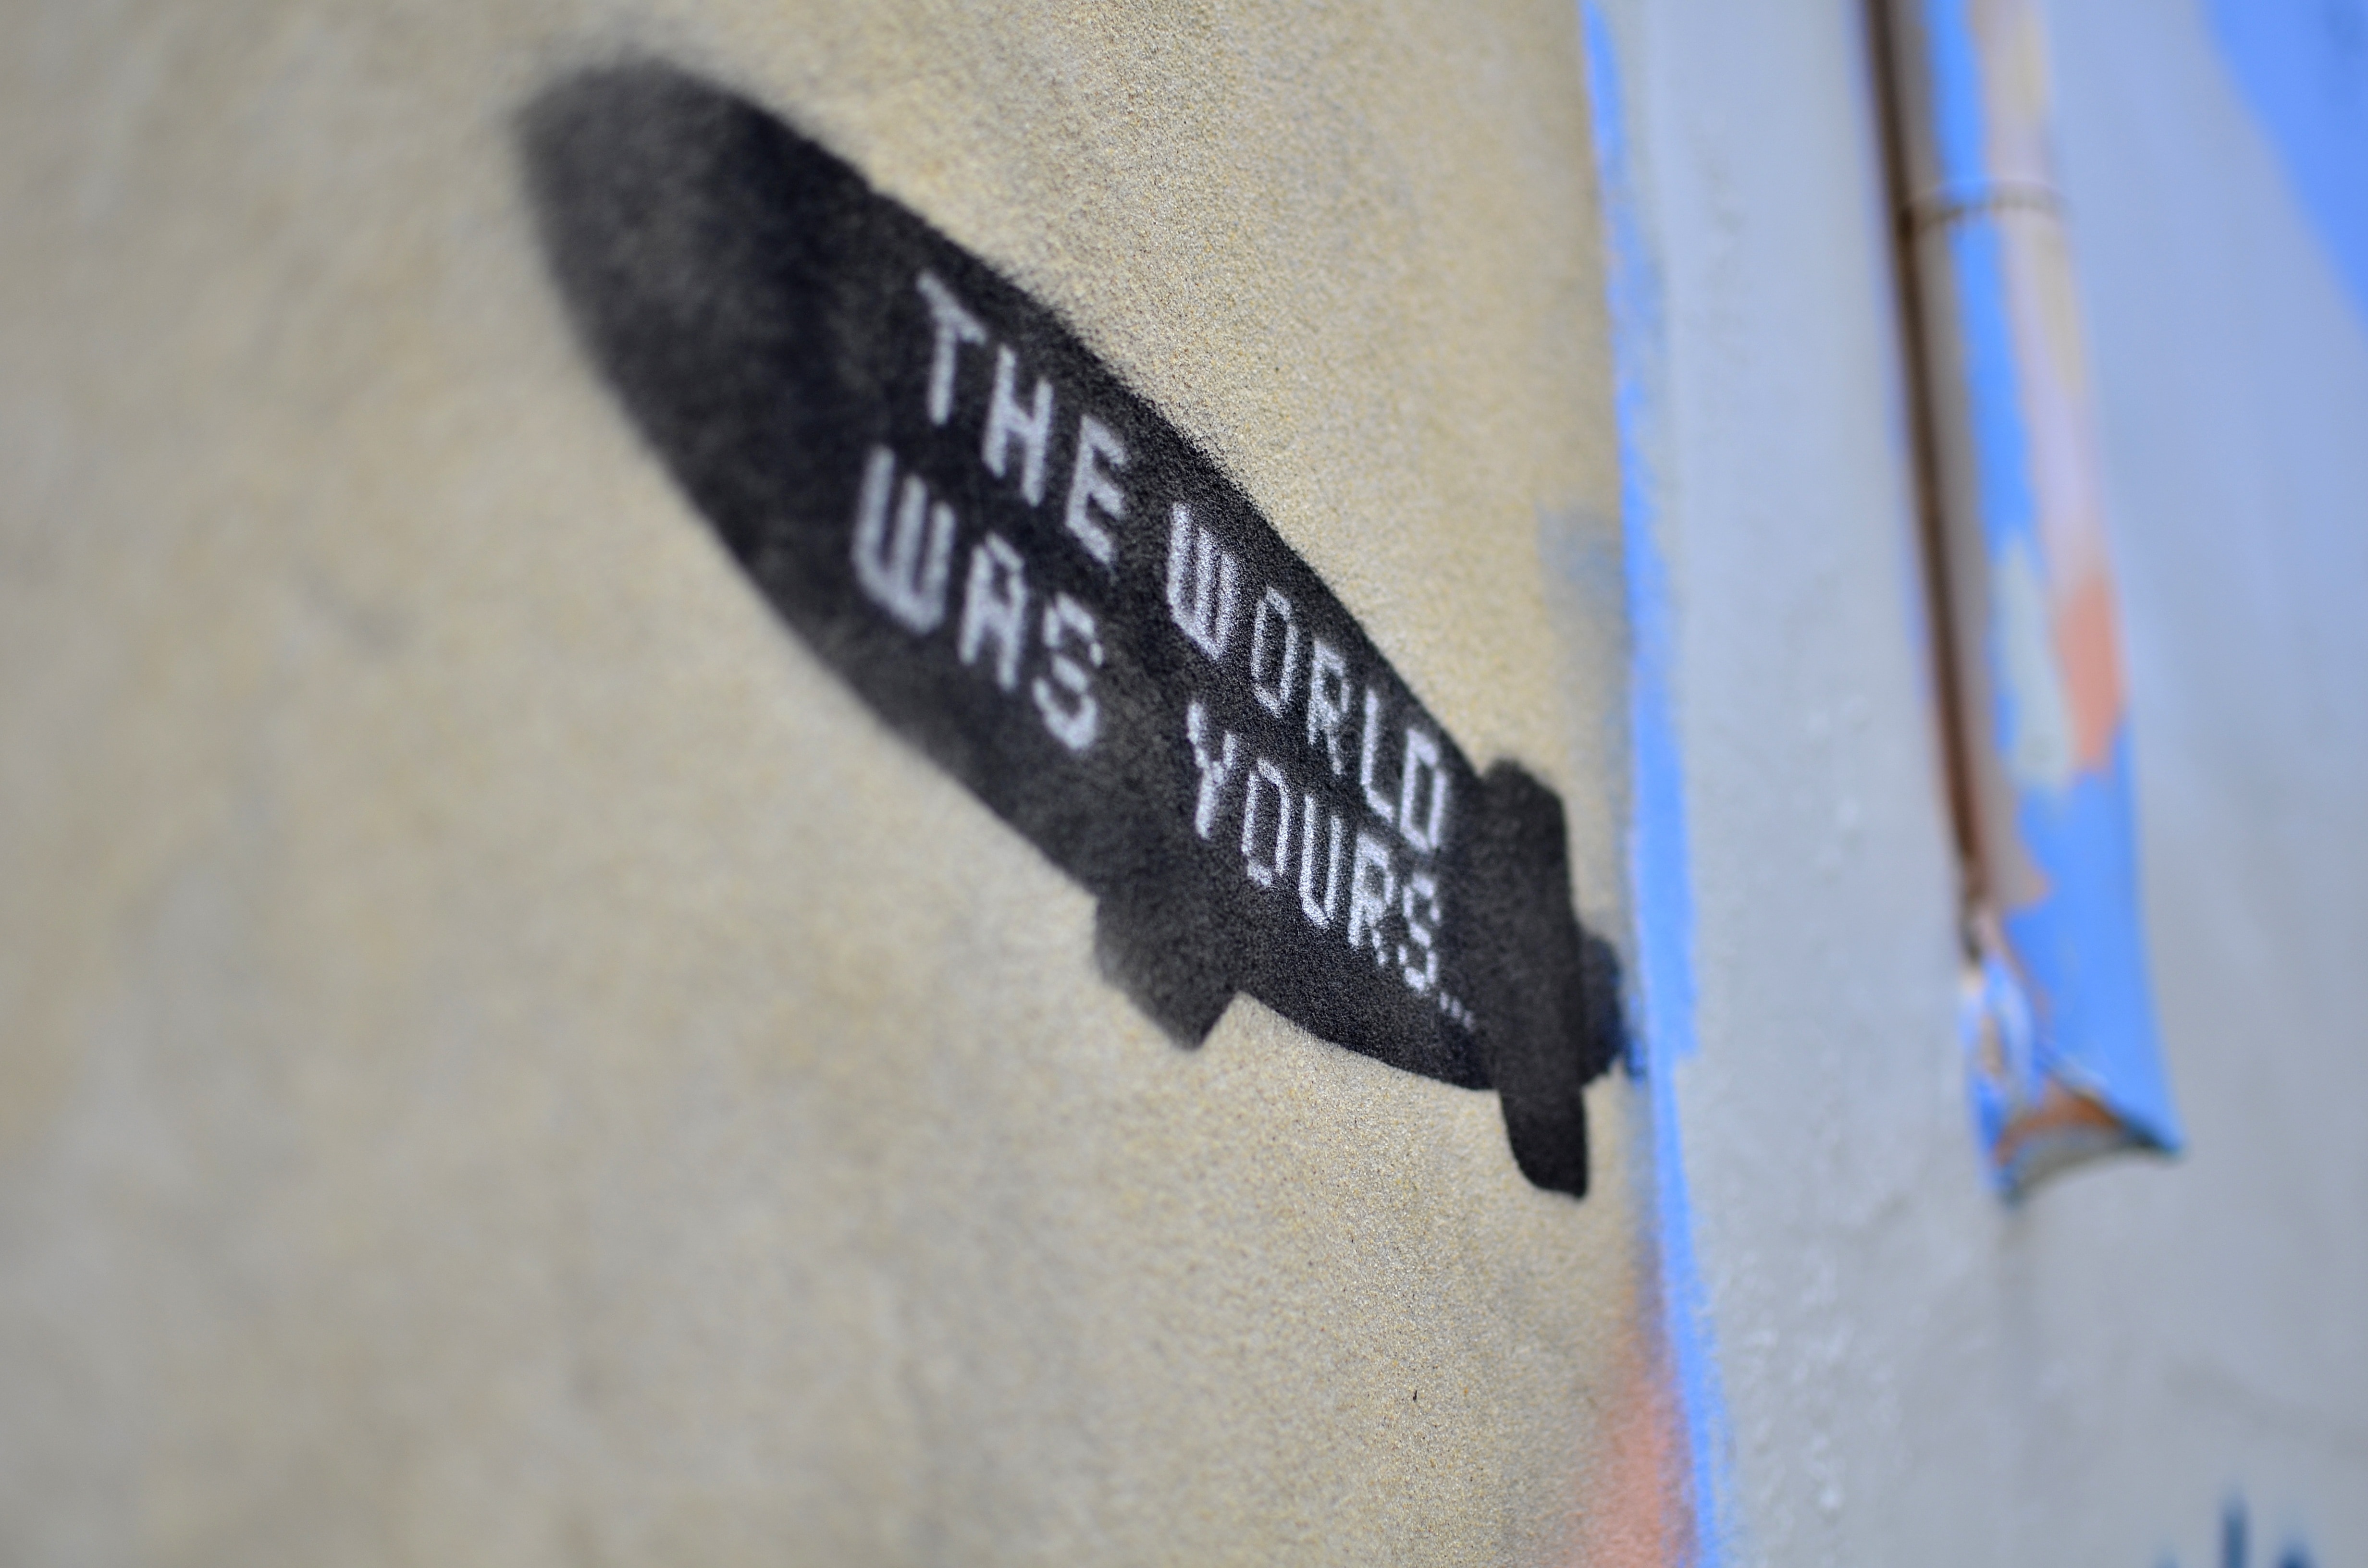 the world was yours print on brown surface